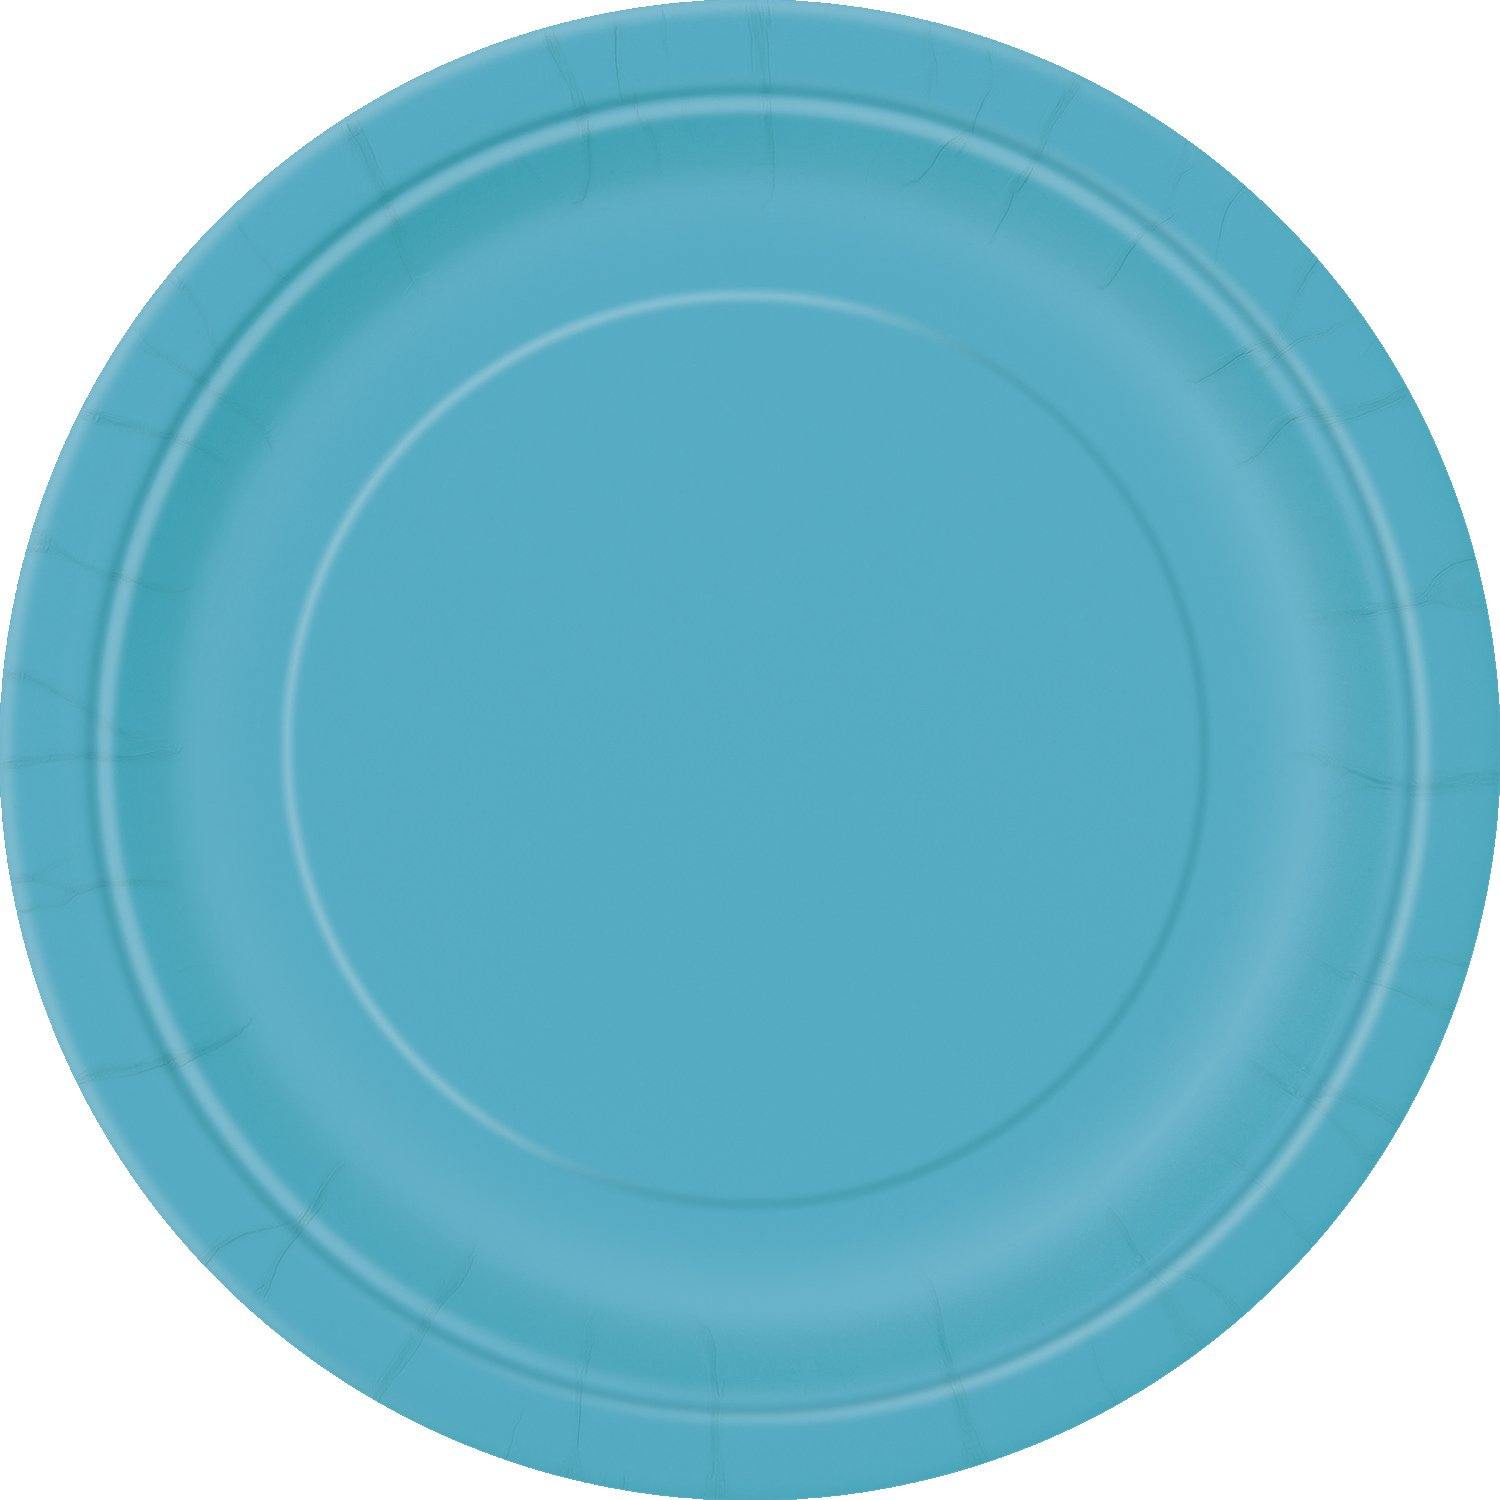 8 Pack Caribbean Teal Paper Plates - 23cm - The Base Warehouse